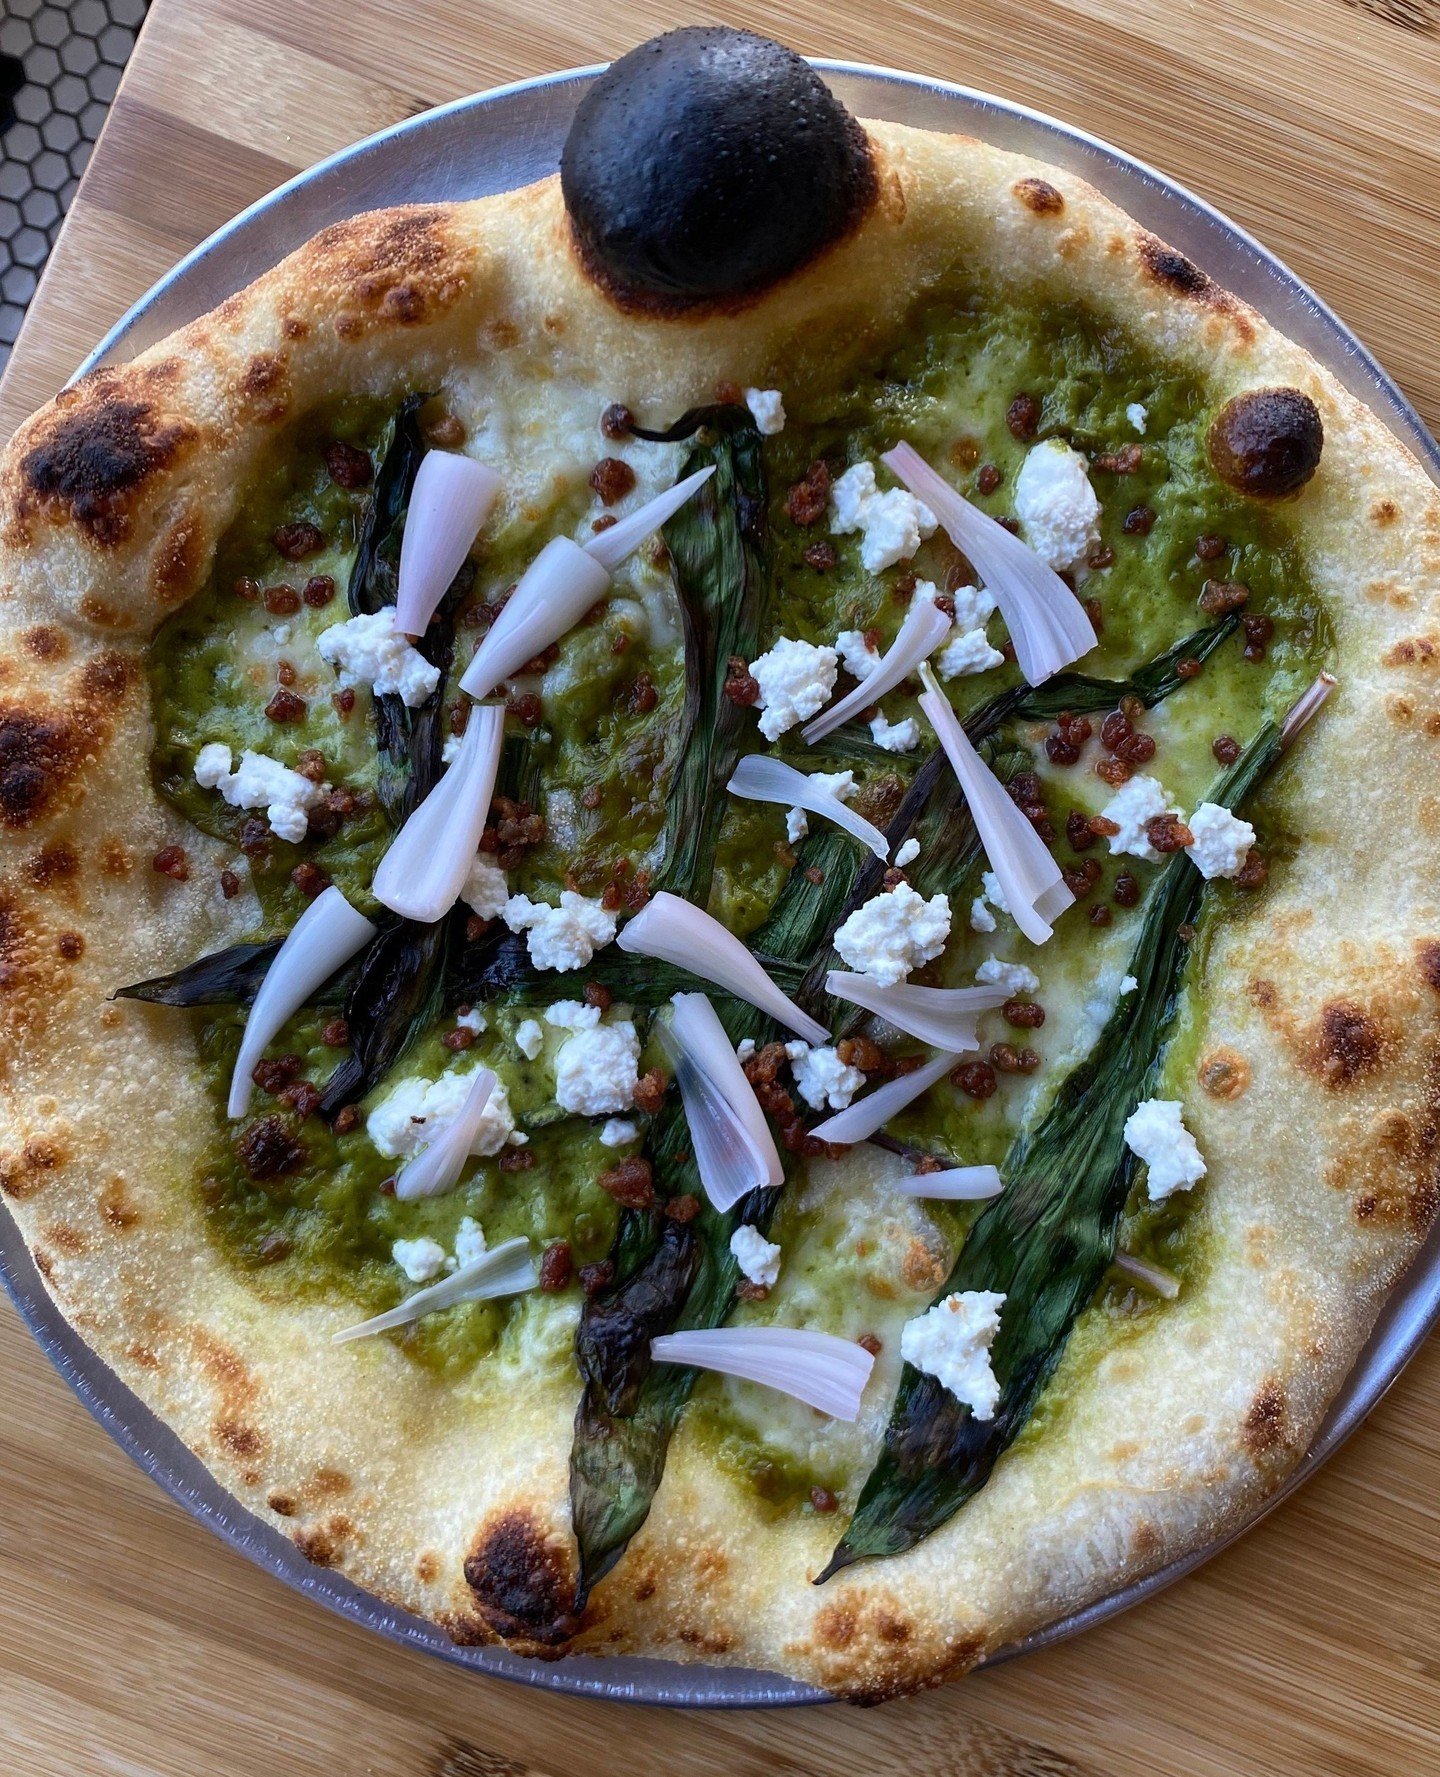 We've got a special za running this week! Wild ramps are only in season for a short time each spring, come and get it! 🍕⁠
⁠
✦ locally sourced wild ramps⁠
✦ scallion cream⁠
✦ fior di latte⁠
✦ prosciutto crumble⁠
✦ pickled ramp bulbs⁠
✦ house lemon ri